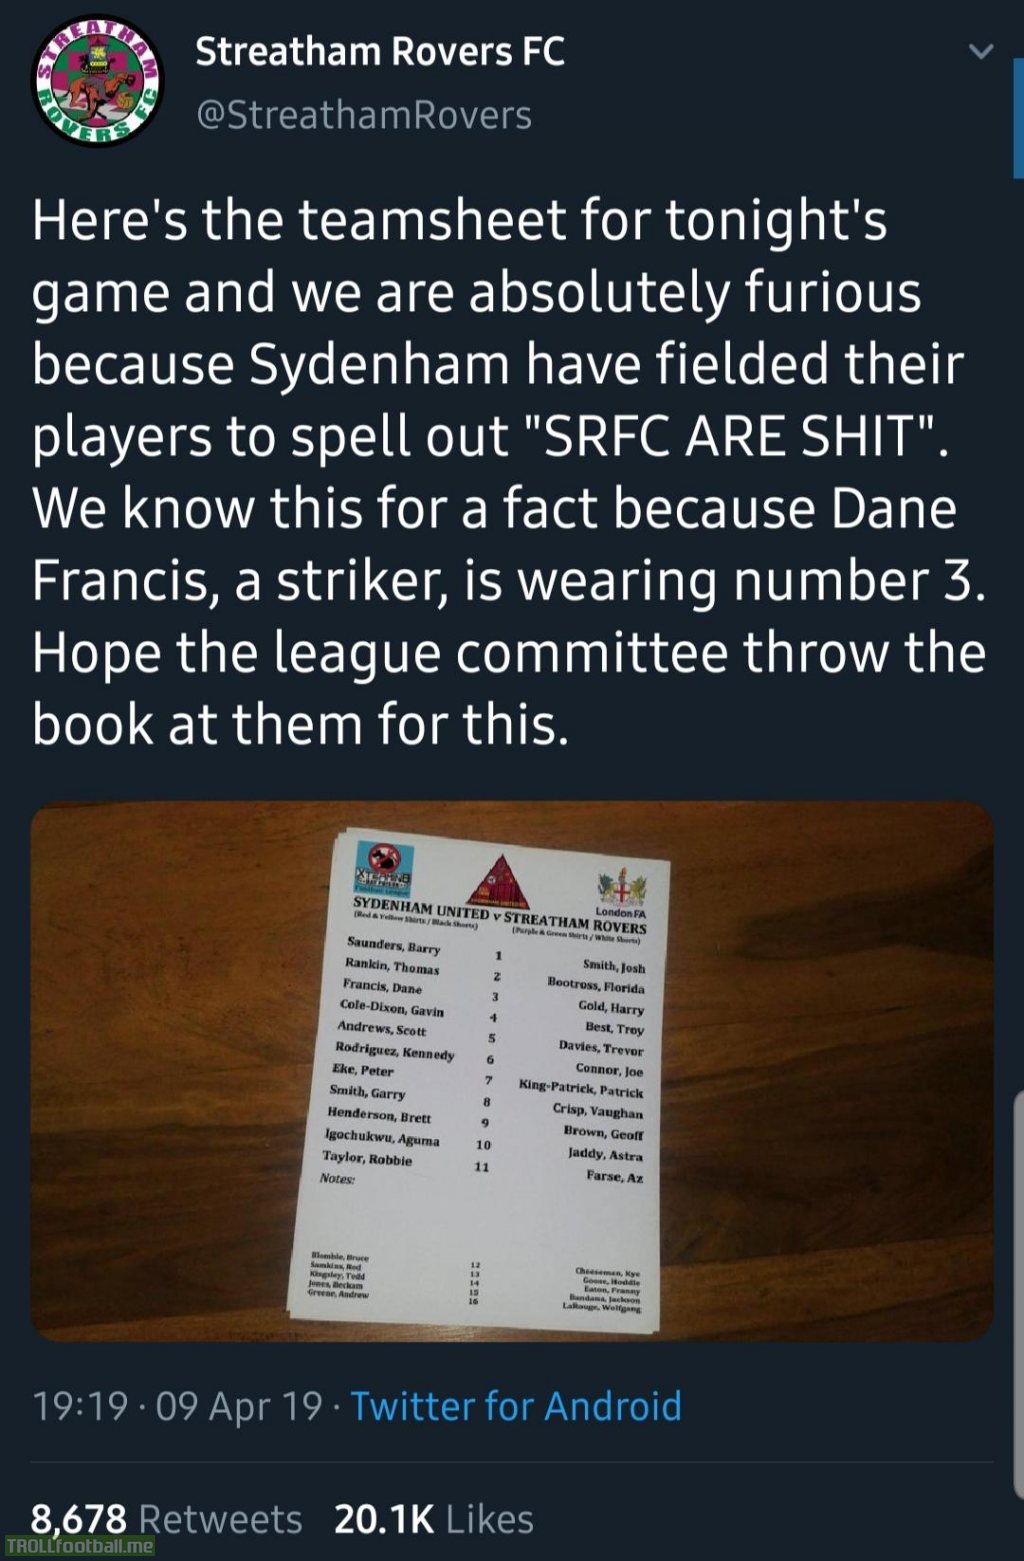 Sydenham United decided to insult their rivals by spelling out "SRFC are shit" on their team sheet